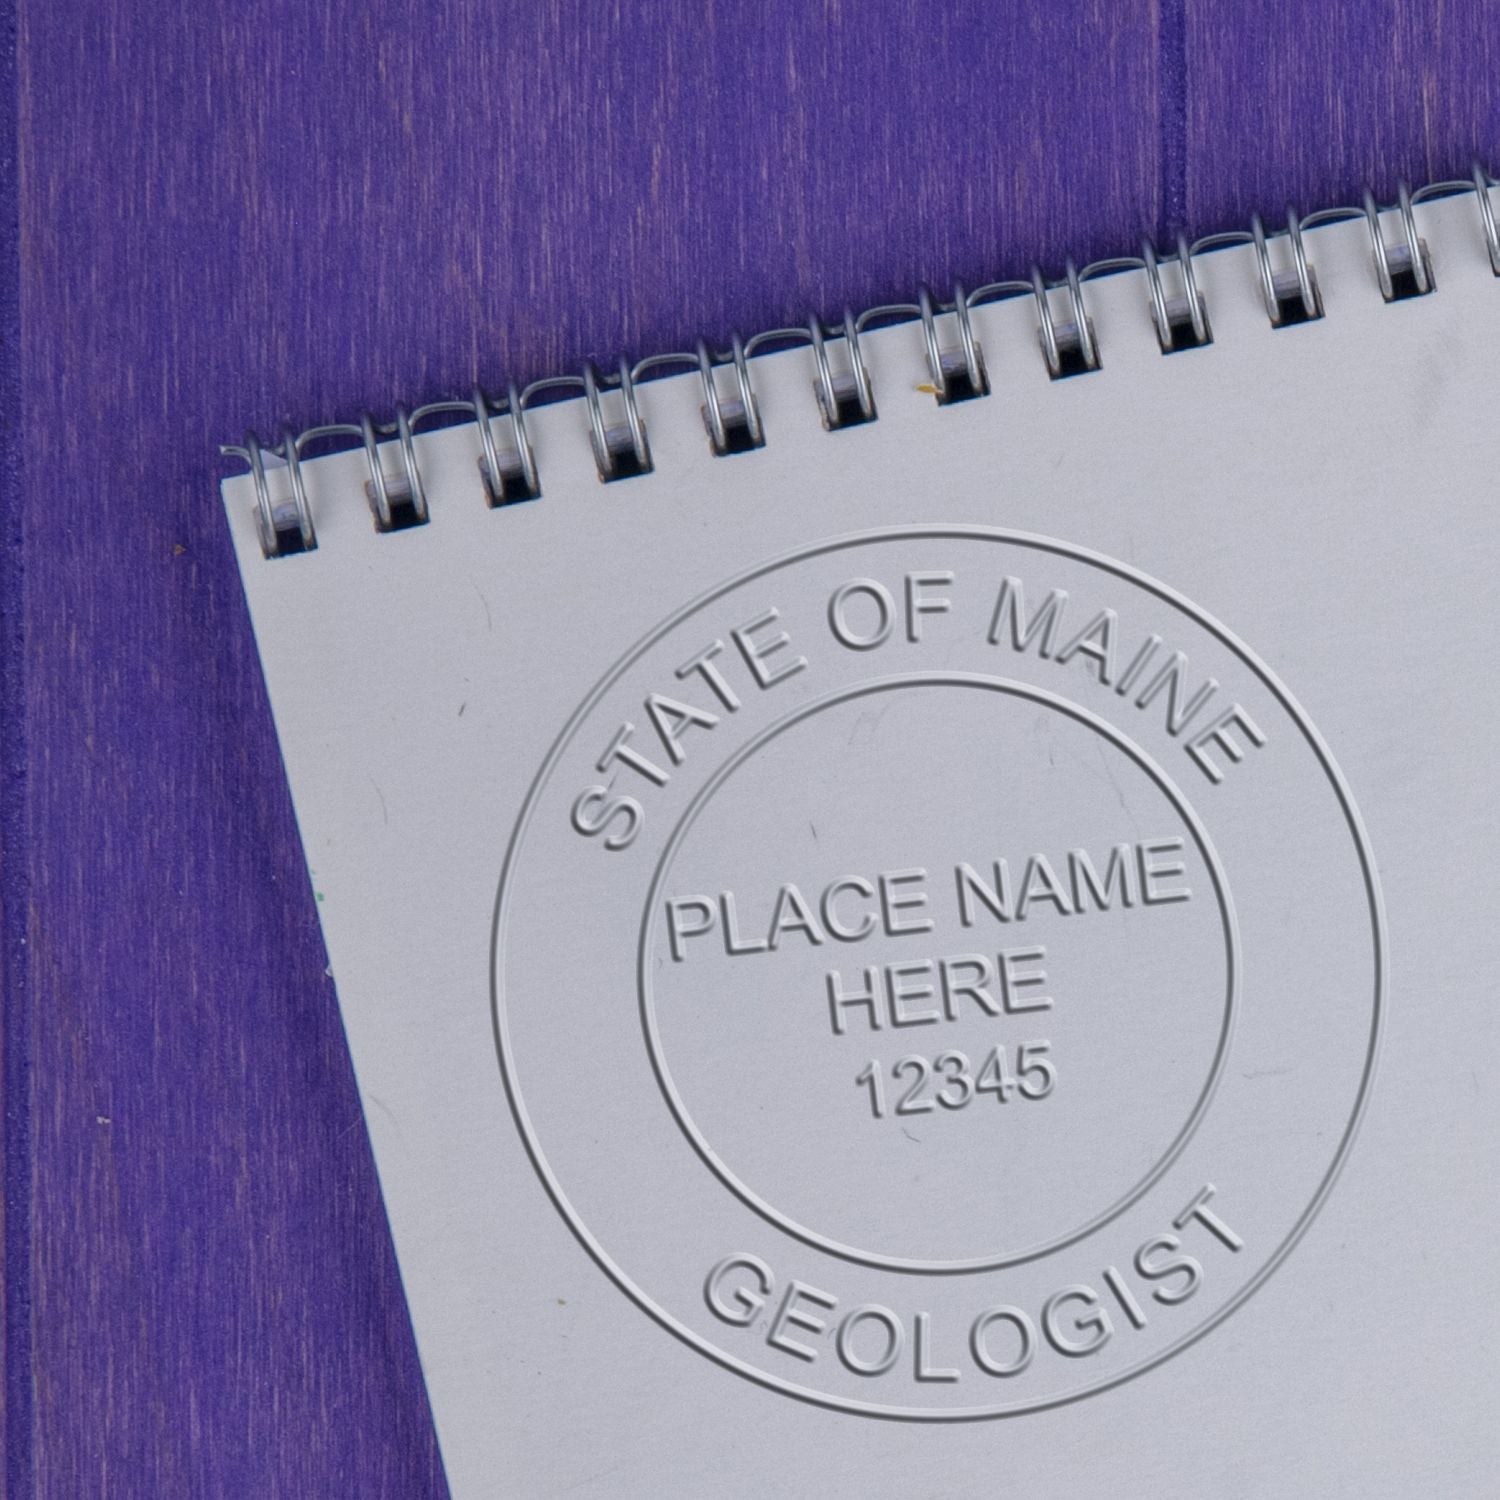 The main image for the State of Maine Extended Long Reach Geologist Seal depicting a sample of the imprint and imprint sample